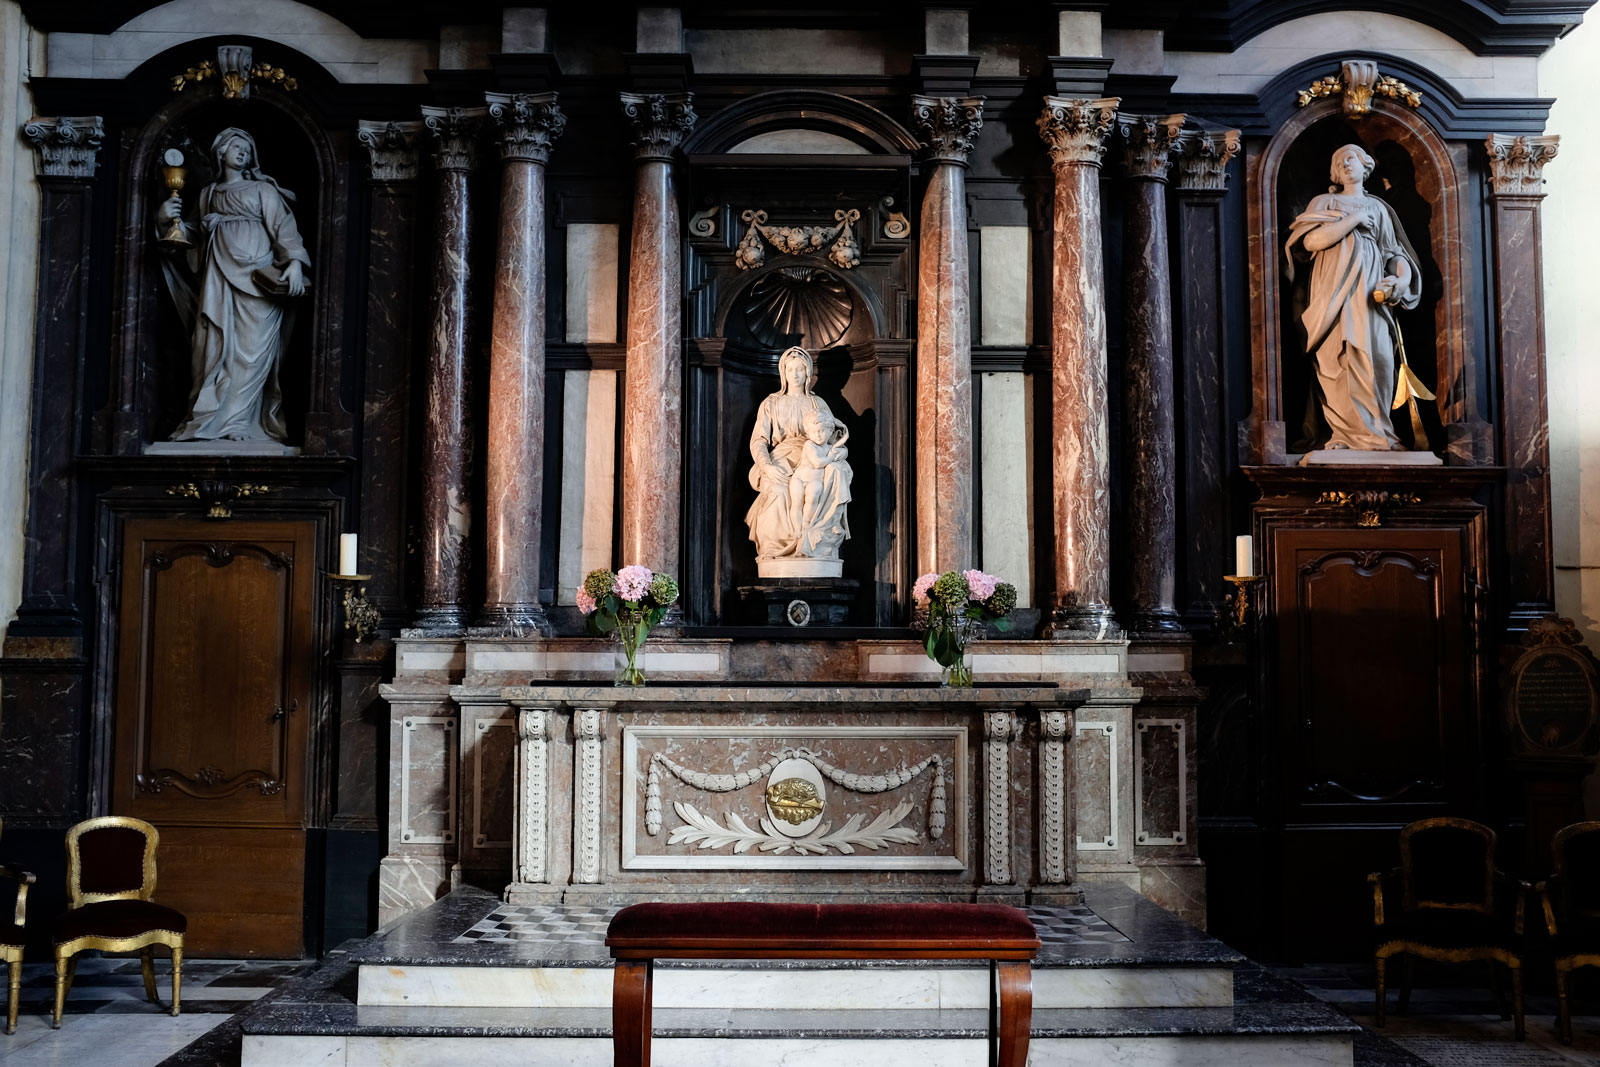 A statue by Michelangelo in the Church of Our Lady Bruges